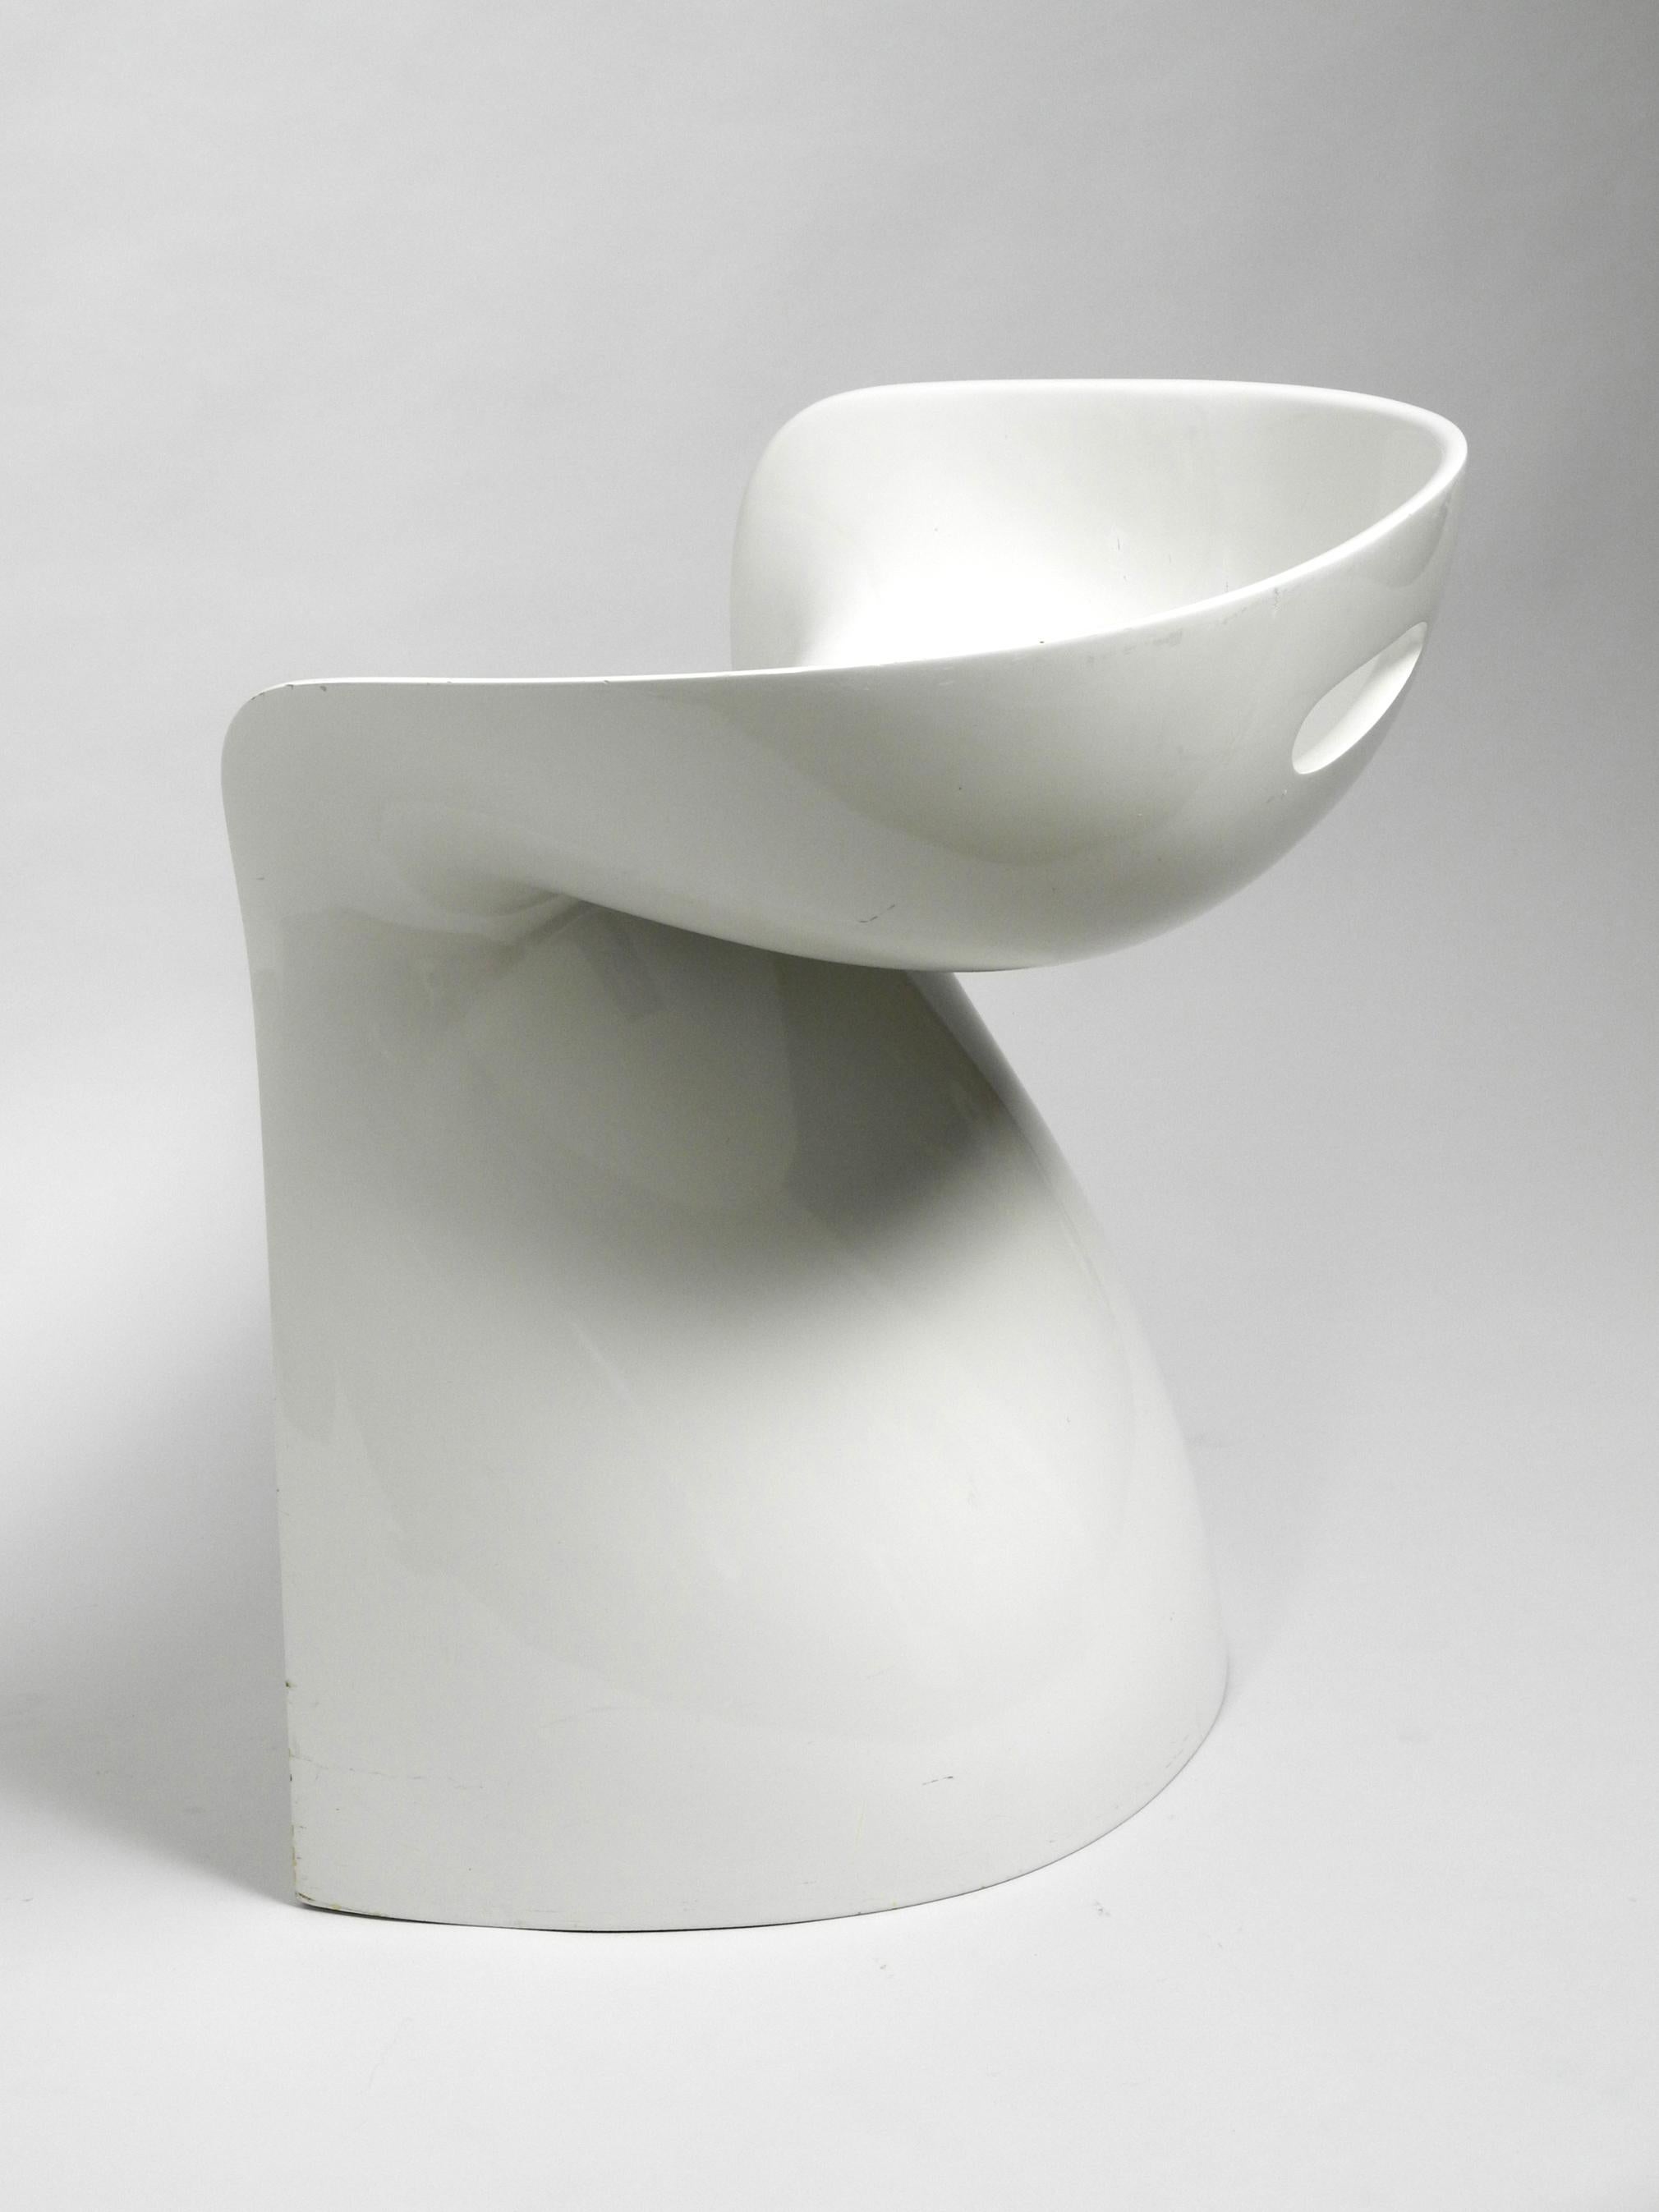 German Rare White Stool by Winfried Staeb from the 1970s for Form + Life Collection